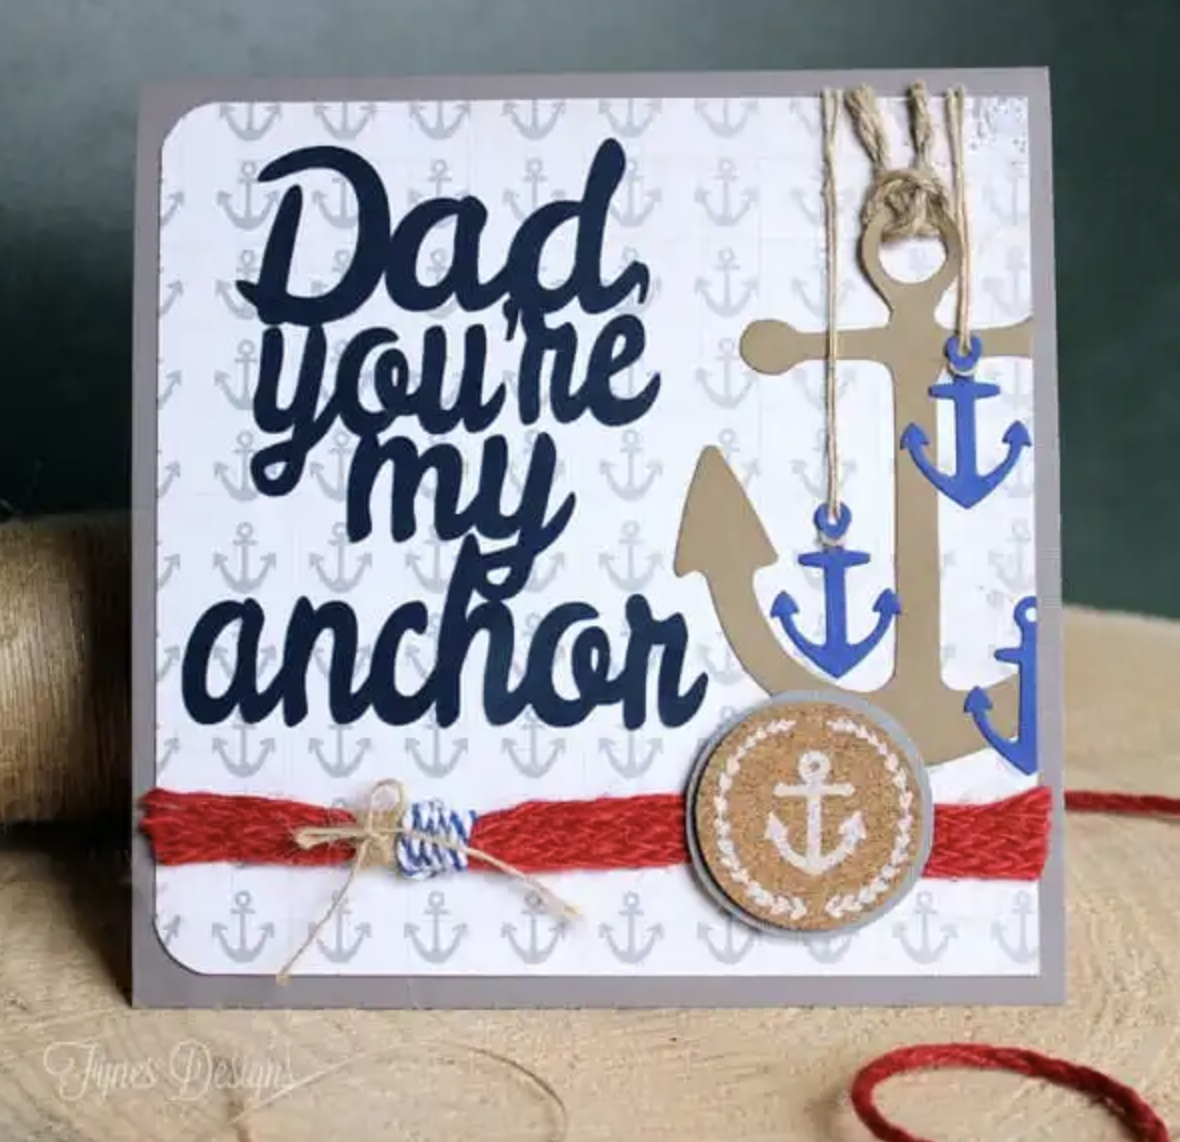 20 Sweet Father's Day Quotes to Write in Dad's Card